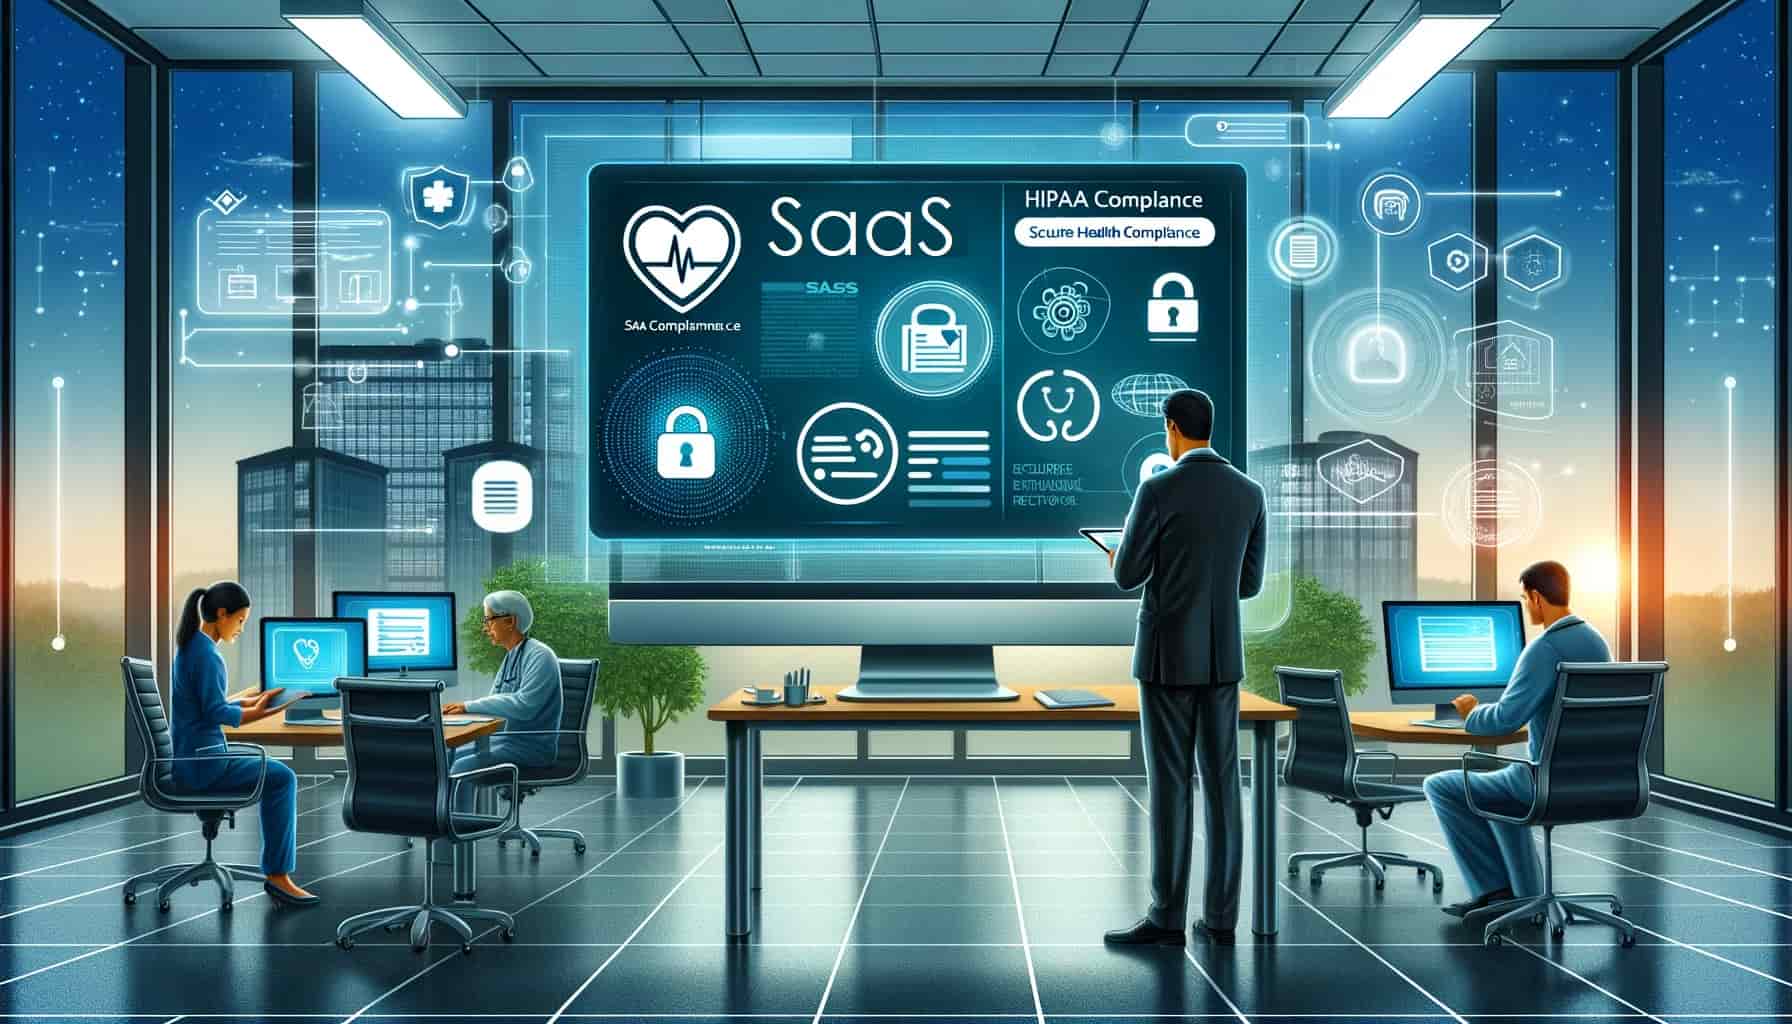 An illustrated office environment showcasing SaaS HIPAA compliance in healthcare technology.